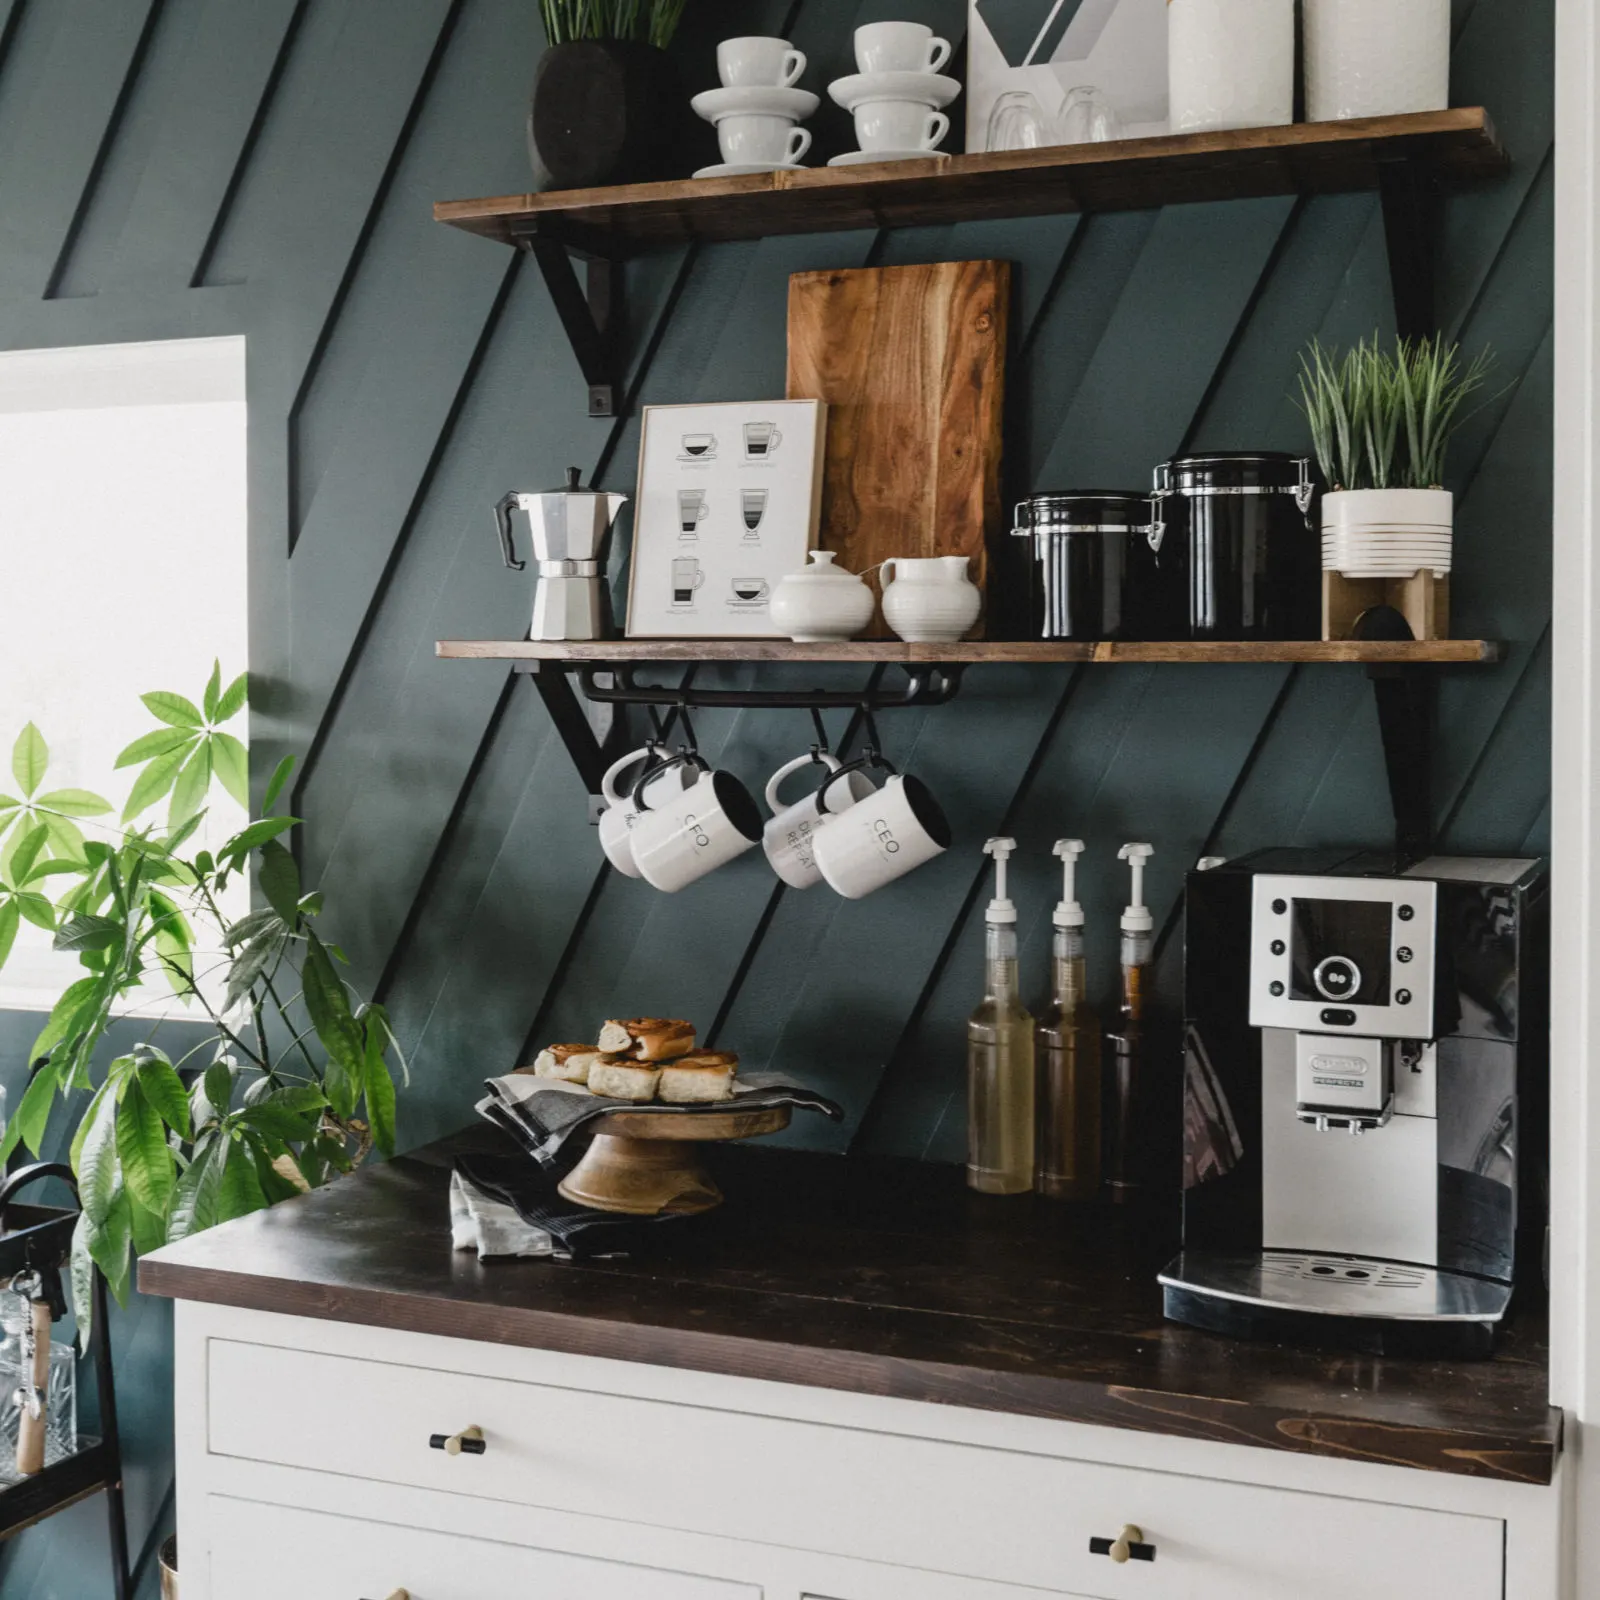 20 Creative DIY Home Coffee Station Ideas To Inspire You!